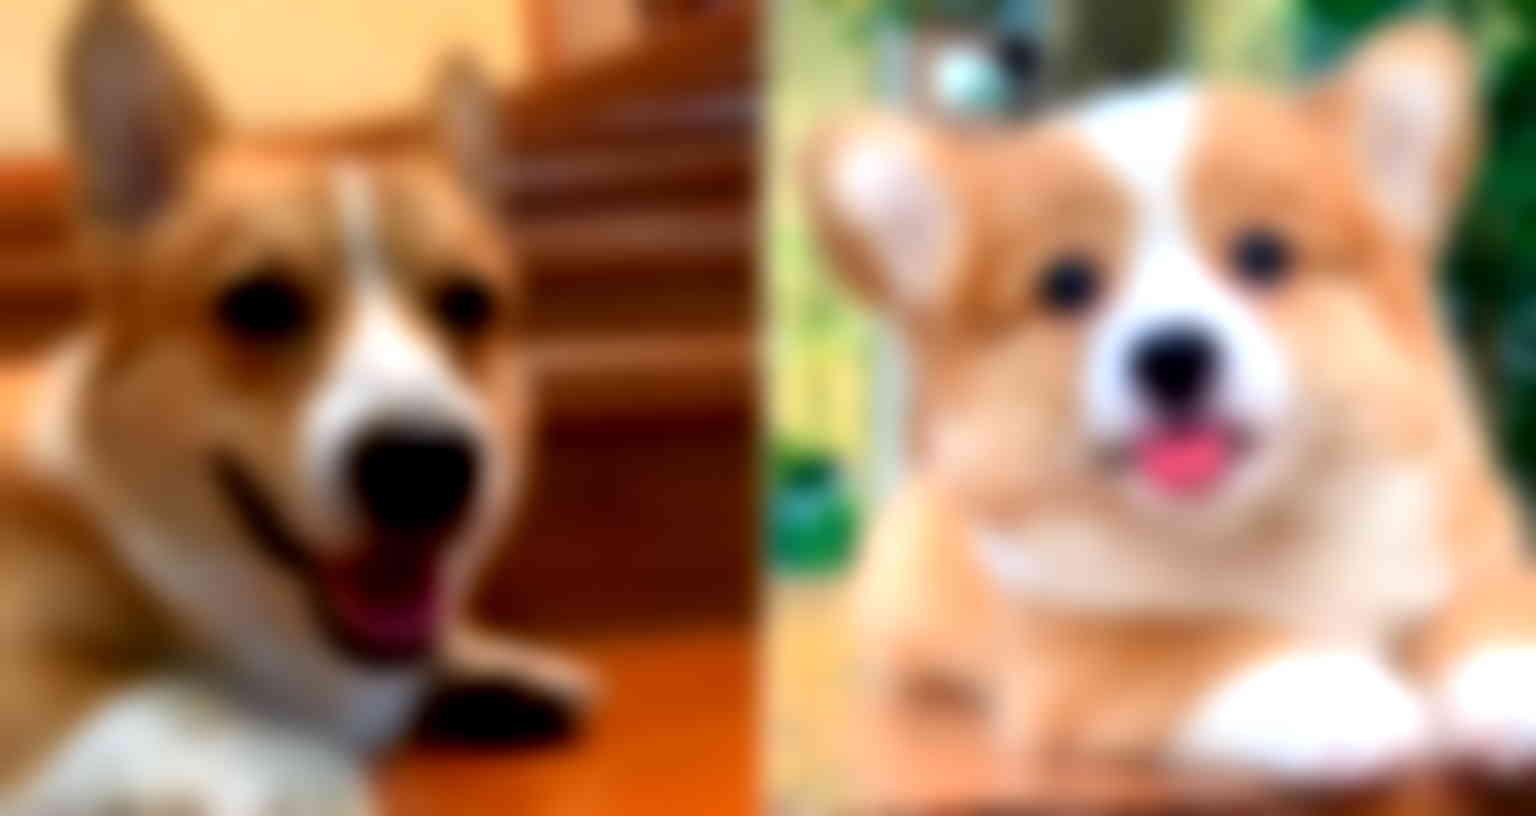 Adorable Corgi Brother and Sister Are a Wholesome Watch for Quarantine Blues